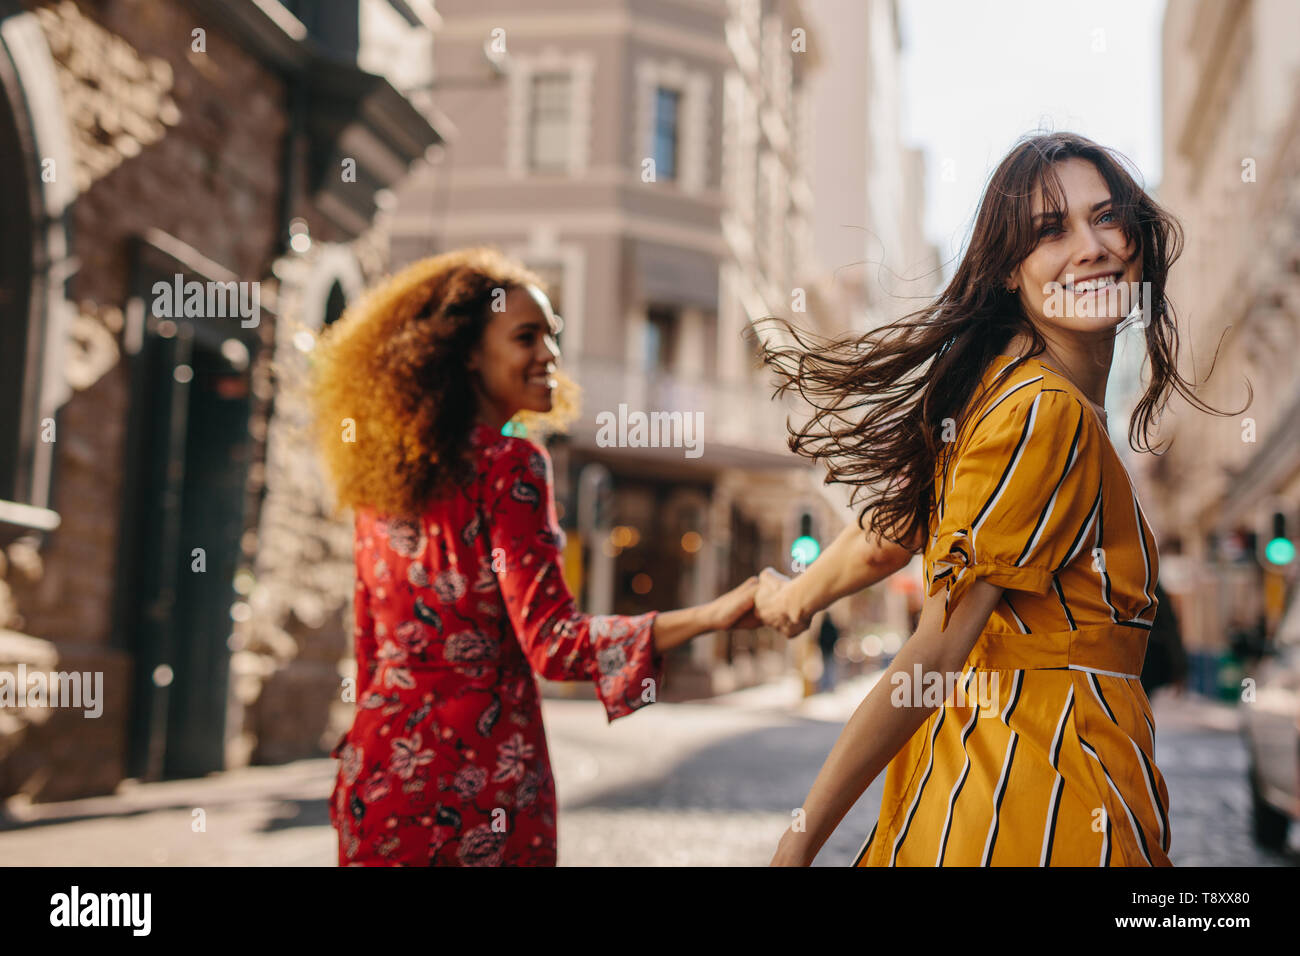 Rear view of two young women walking together on city street holding hands. Woman looking over her shoulder while walking with her friend outdoors. Stock Photo